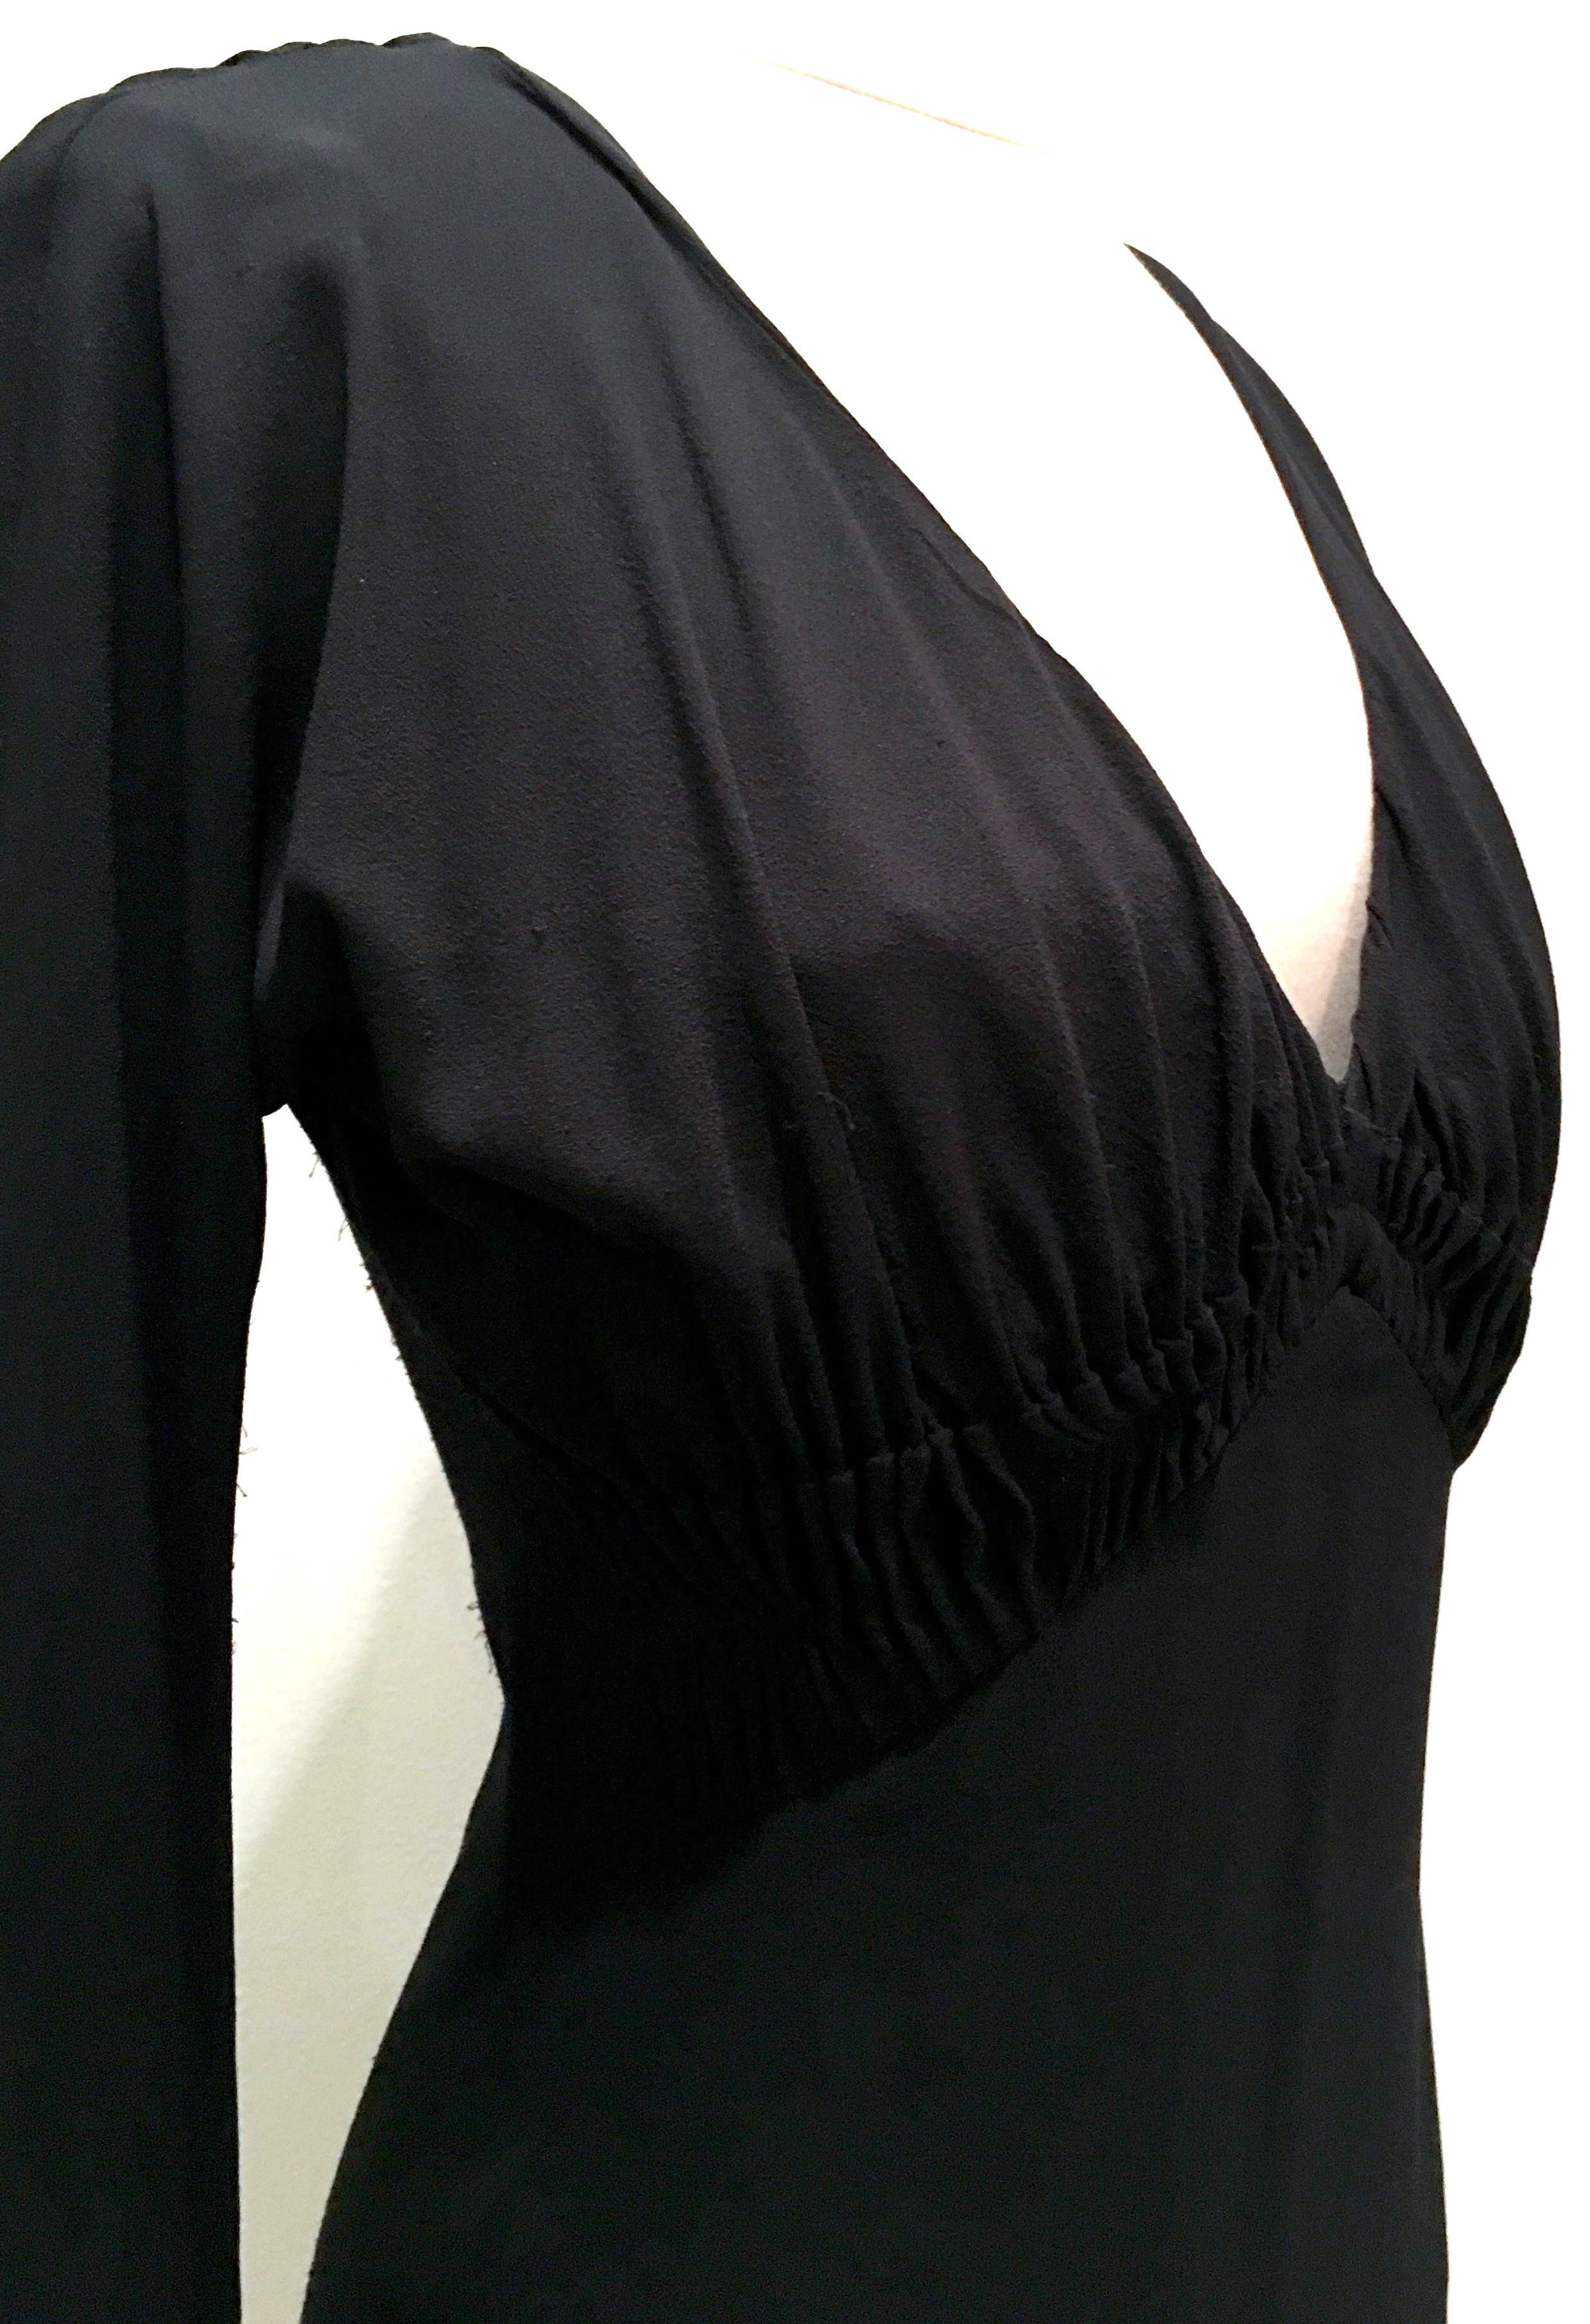 2003 Italian Silk Long Sleeve Deep Plunge Black Dress By Tom Ford For Gucci-42 For Sale 5